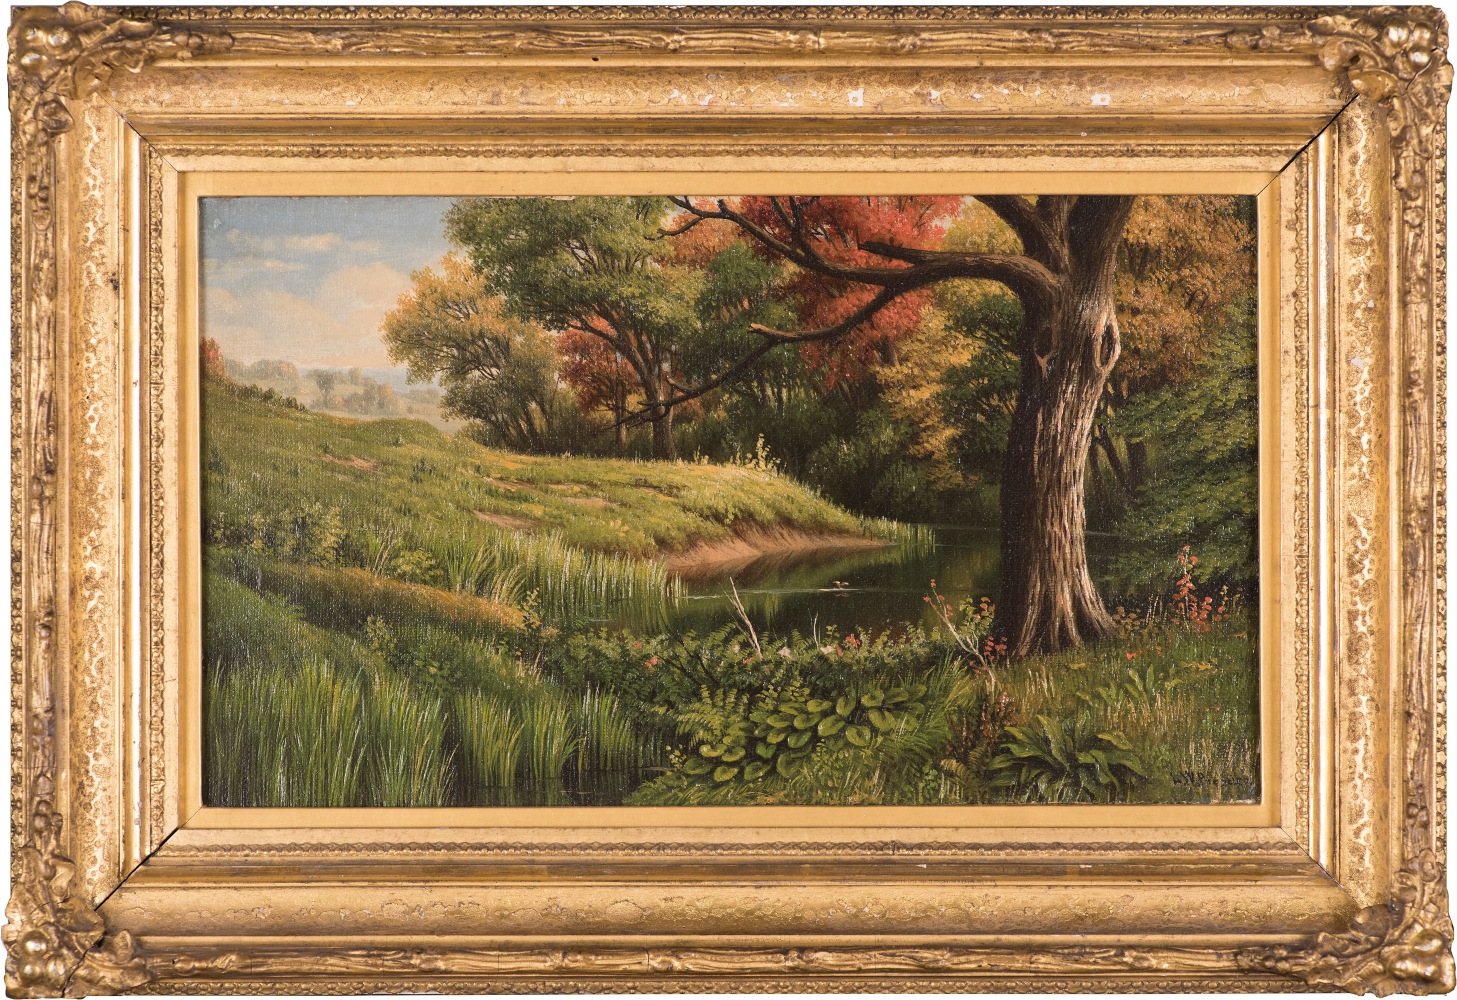 Levi Wells Prentice (1851–1935), An Early Autumn Landscape, 1886, oil on canvas, 7 1/2 x 13 in., signed and lower right: L. W. Prentice, inscribed on verso: L. W. Prentice / 1886 (framed)